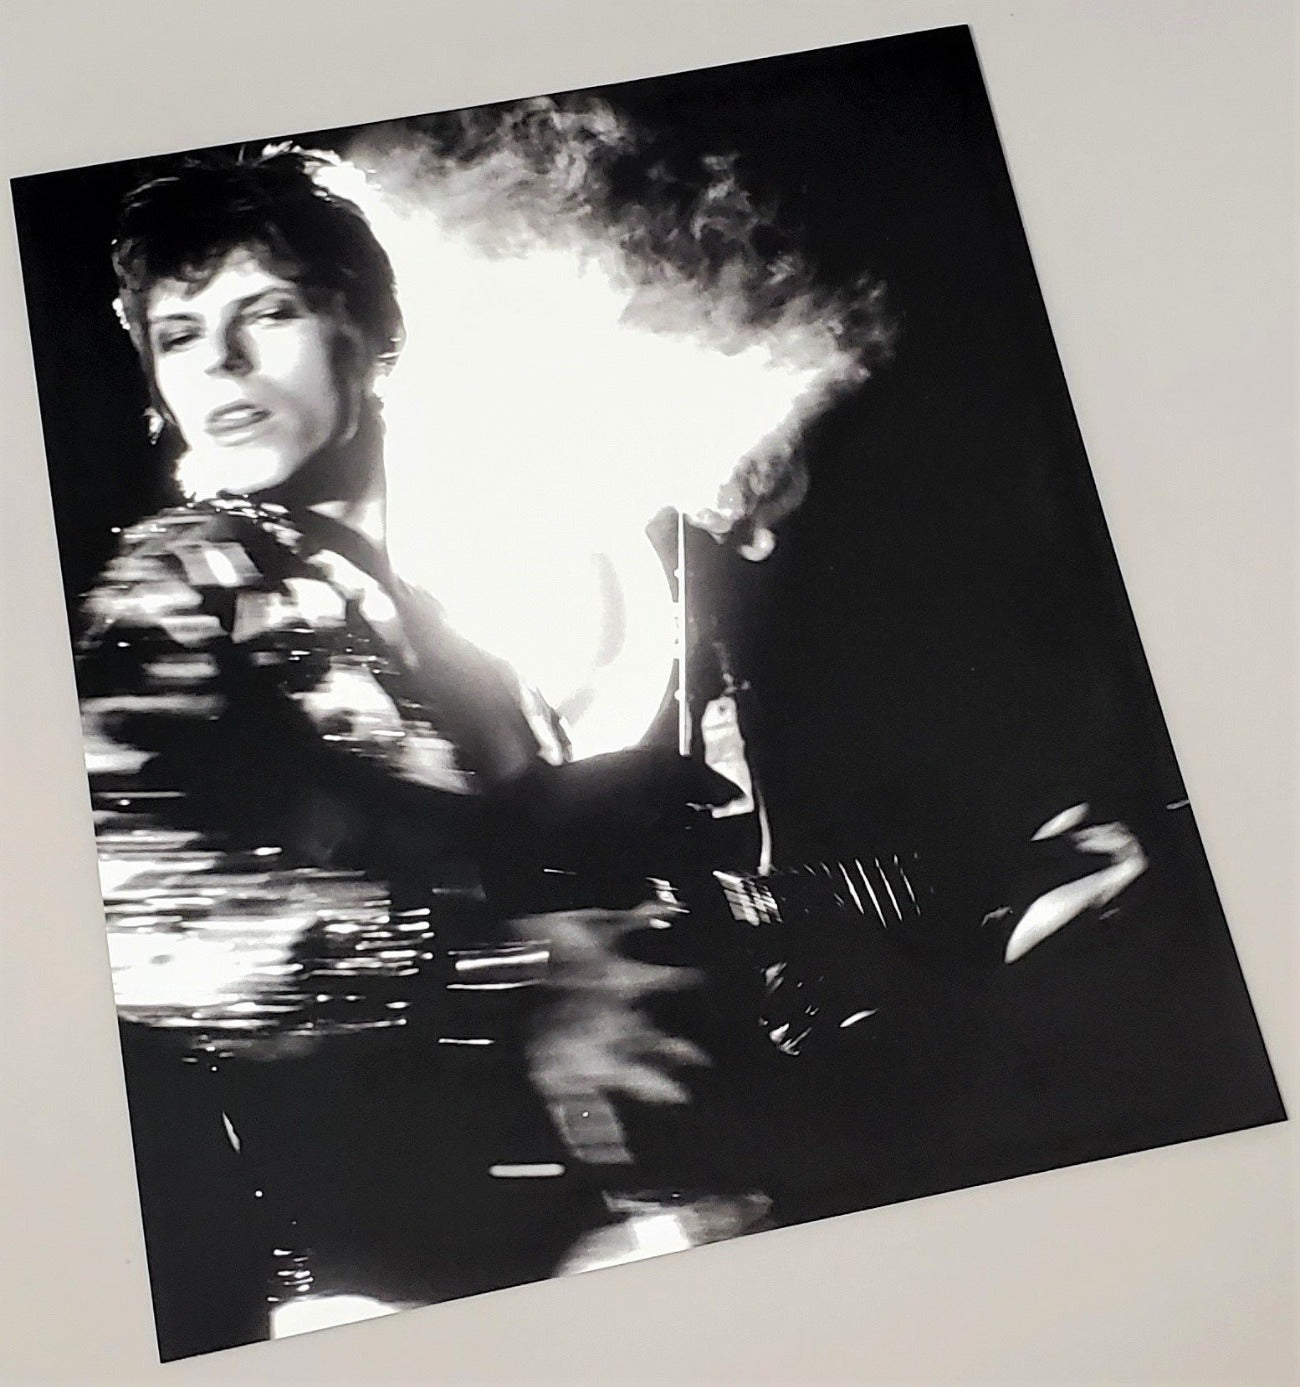 Original photograph page featured in 2010 David Bowie hardcover book by Jeff Hudson